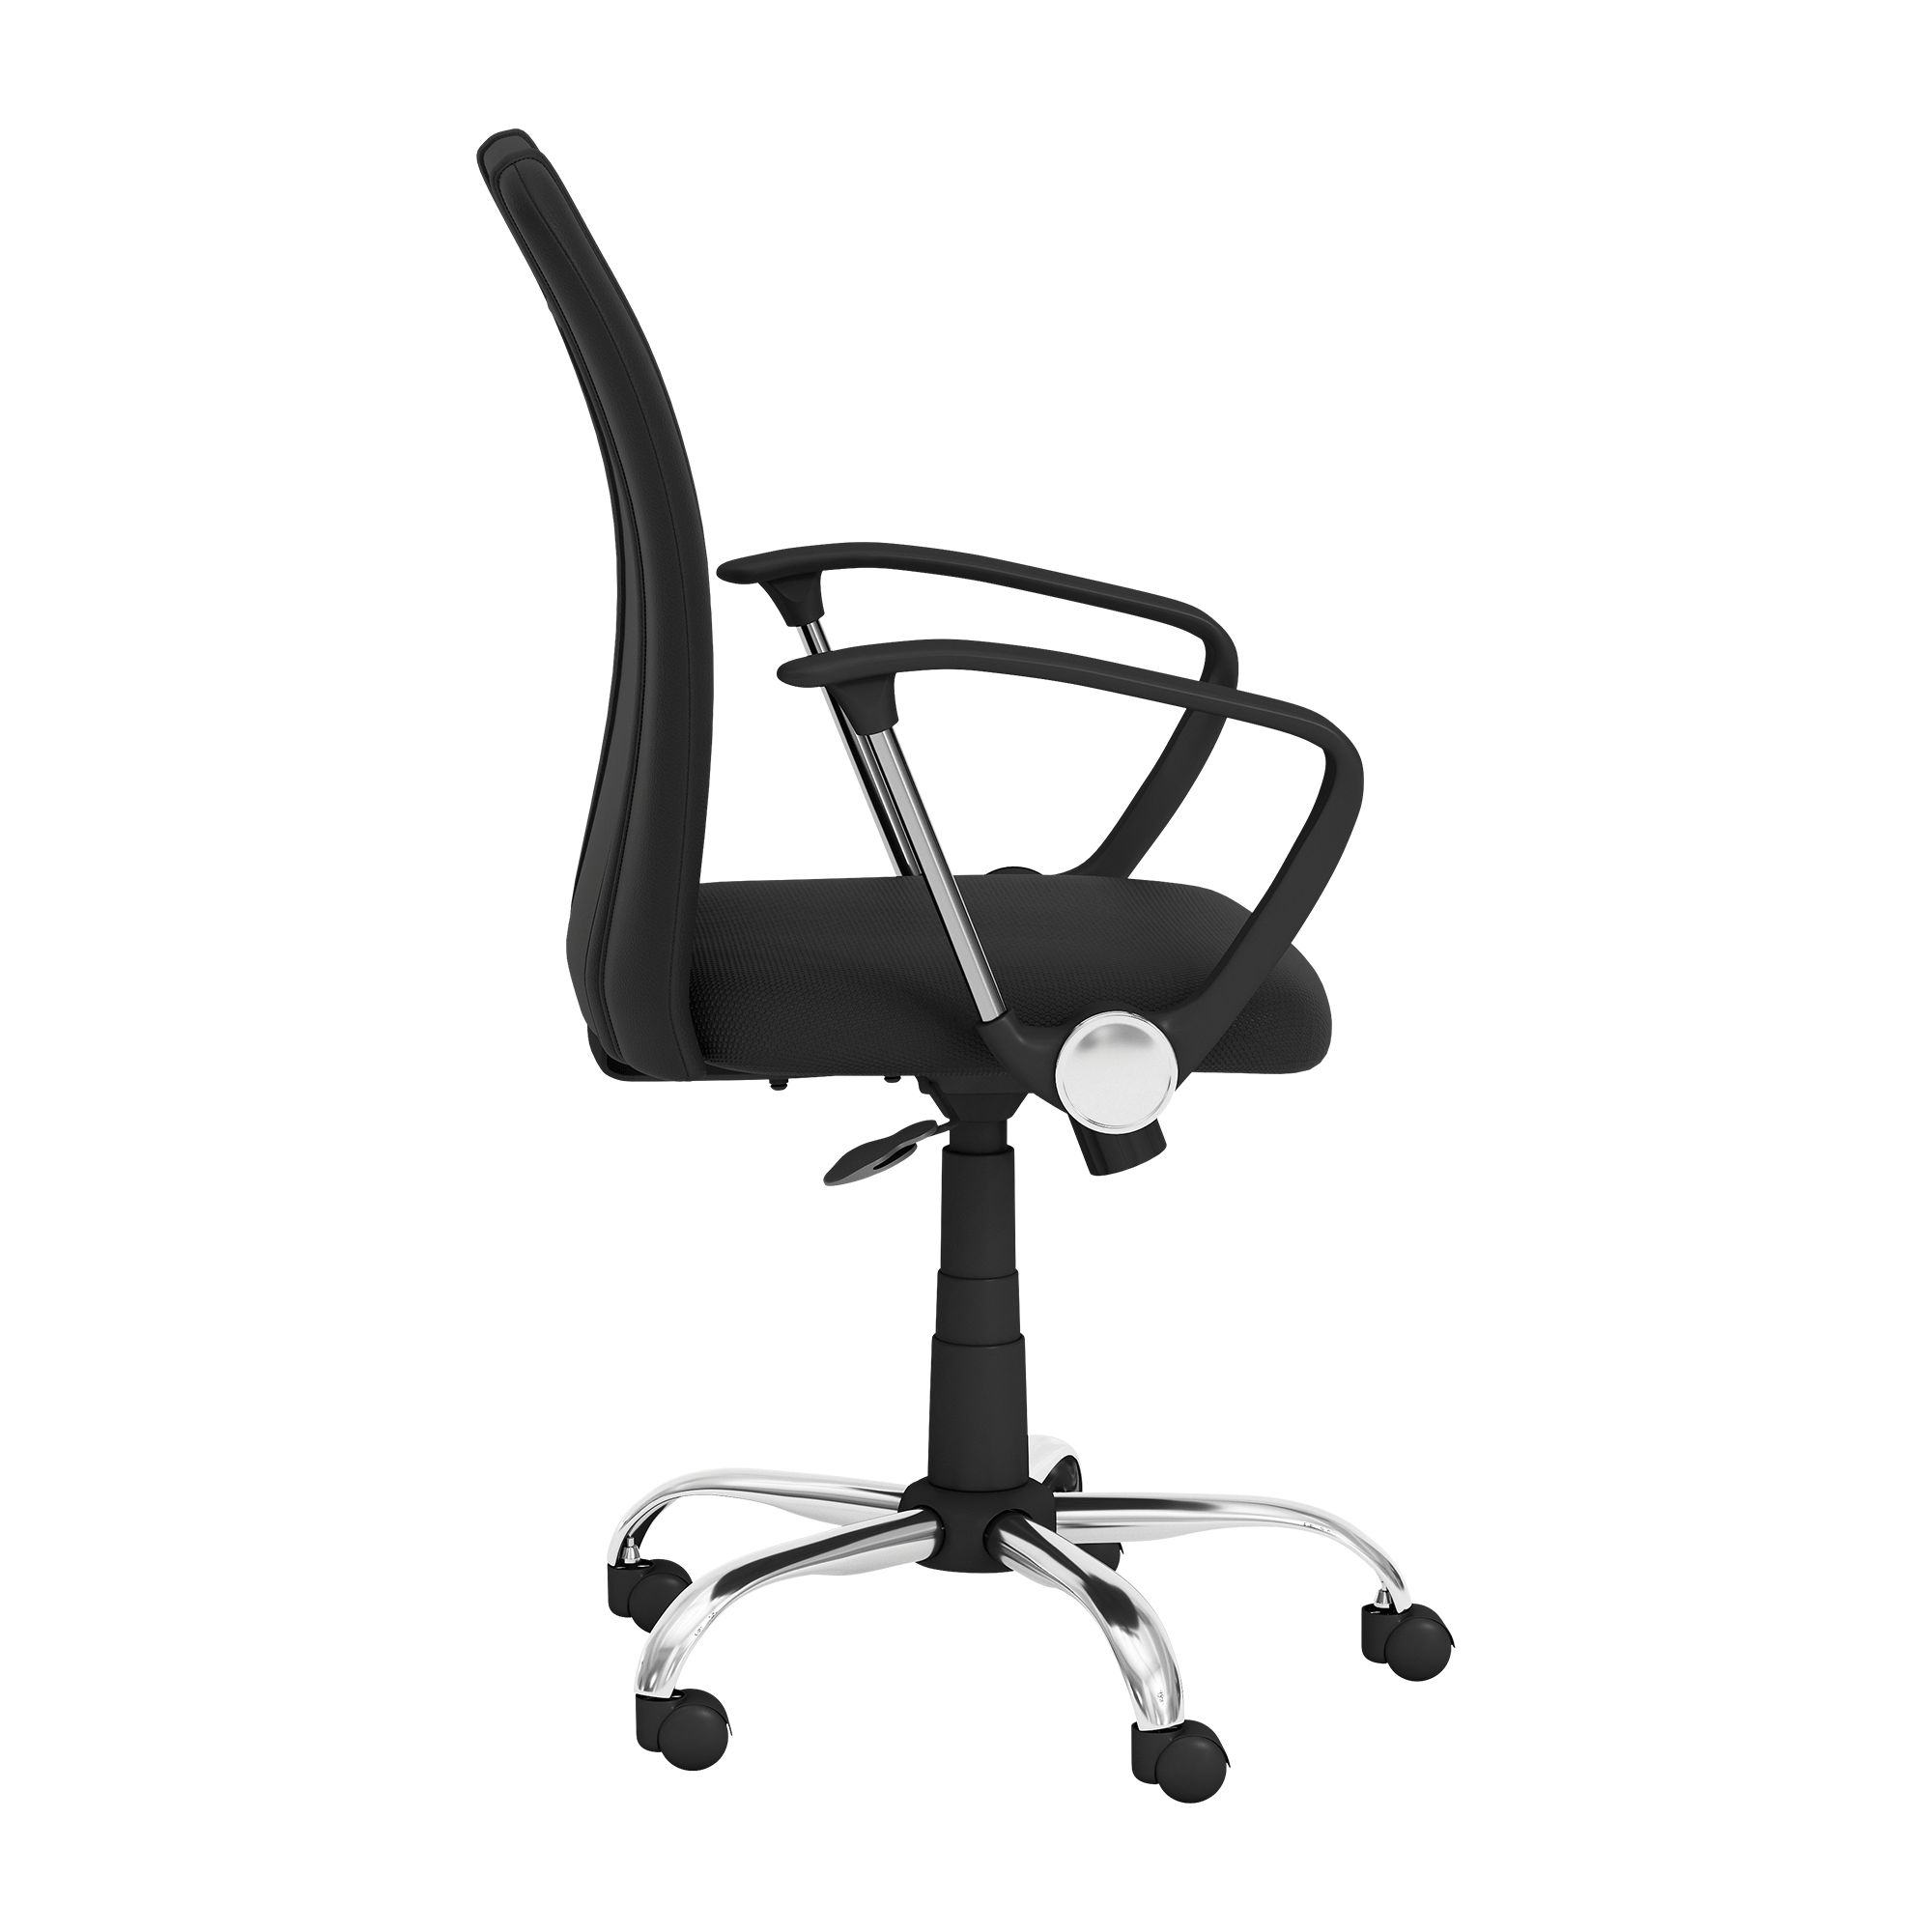 Curve Task Chair with Chicago Cubs Cooperstown Primary